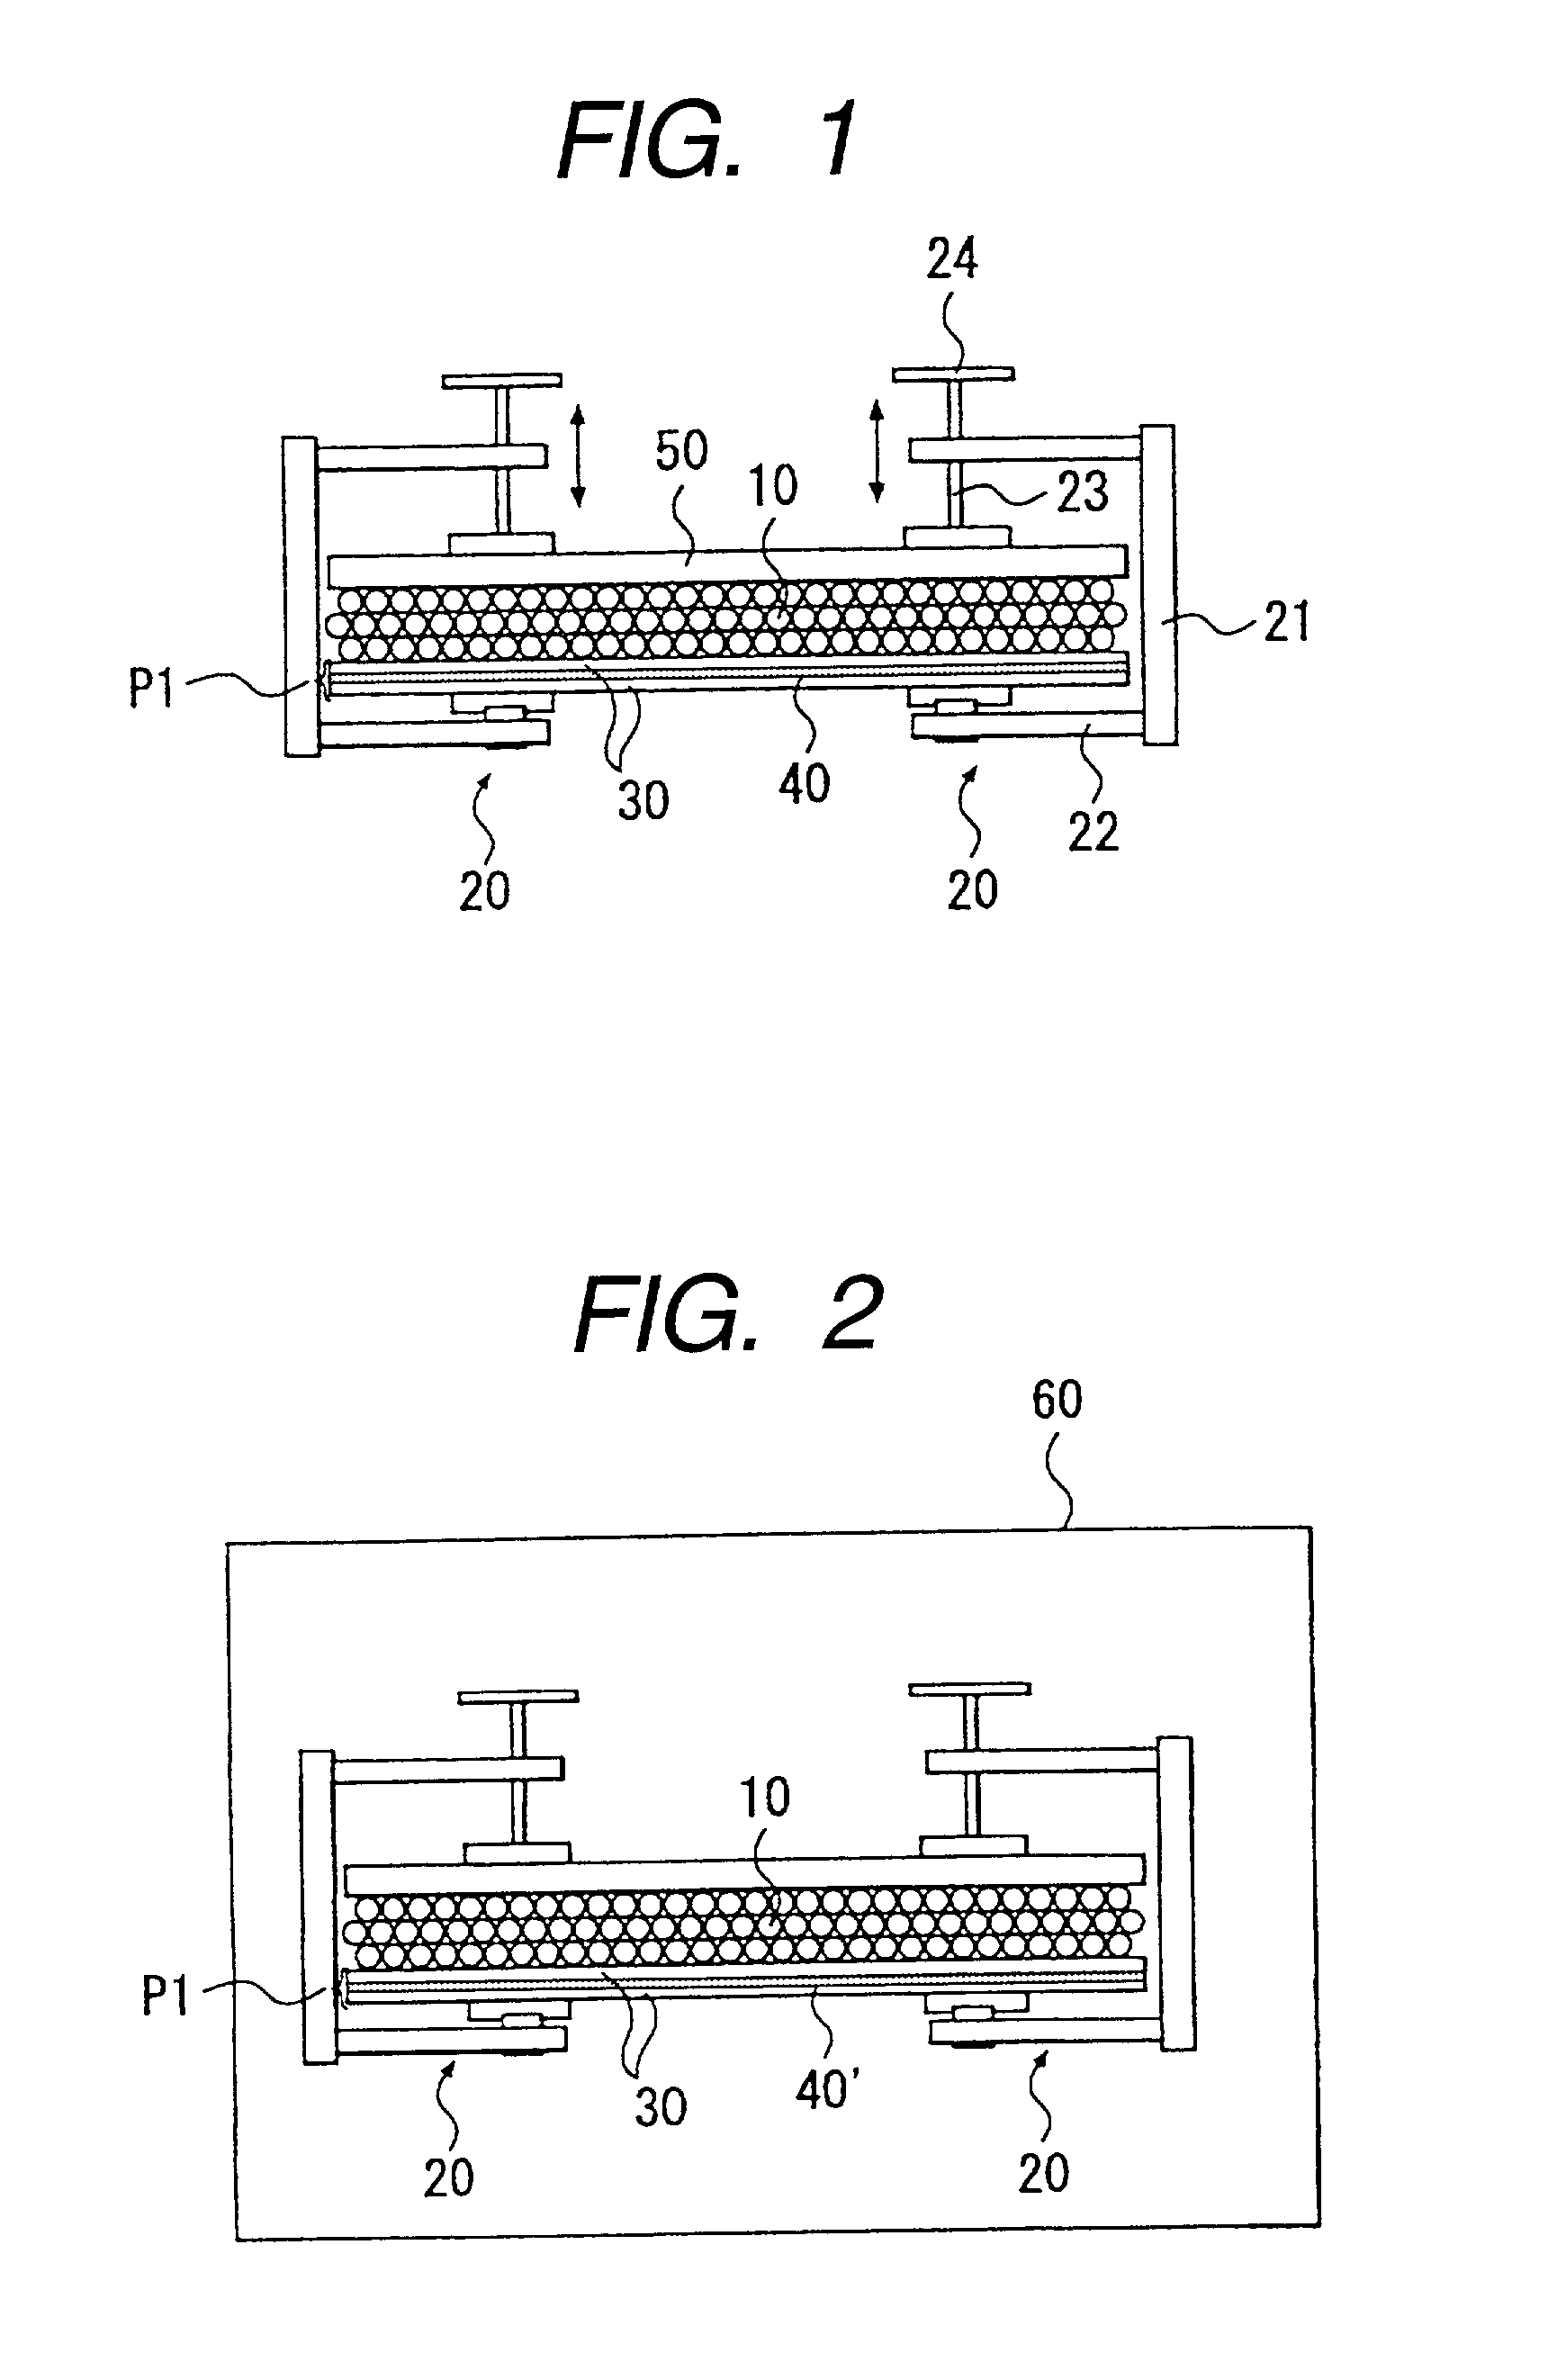 Method for manufacturing a structure